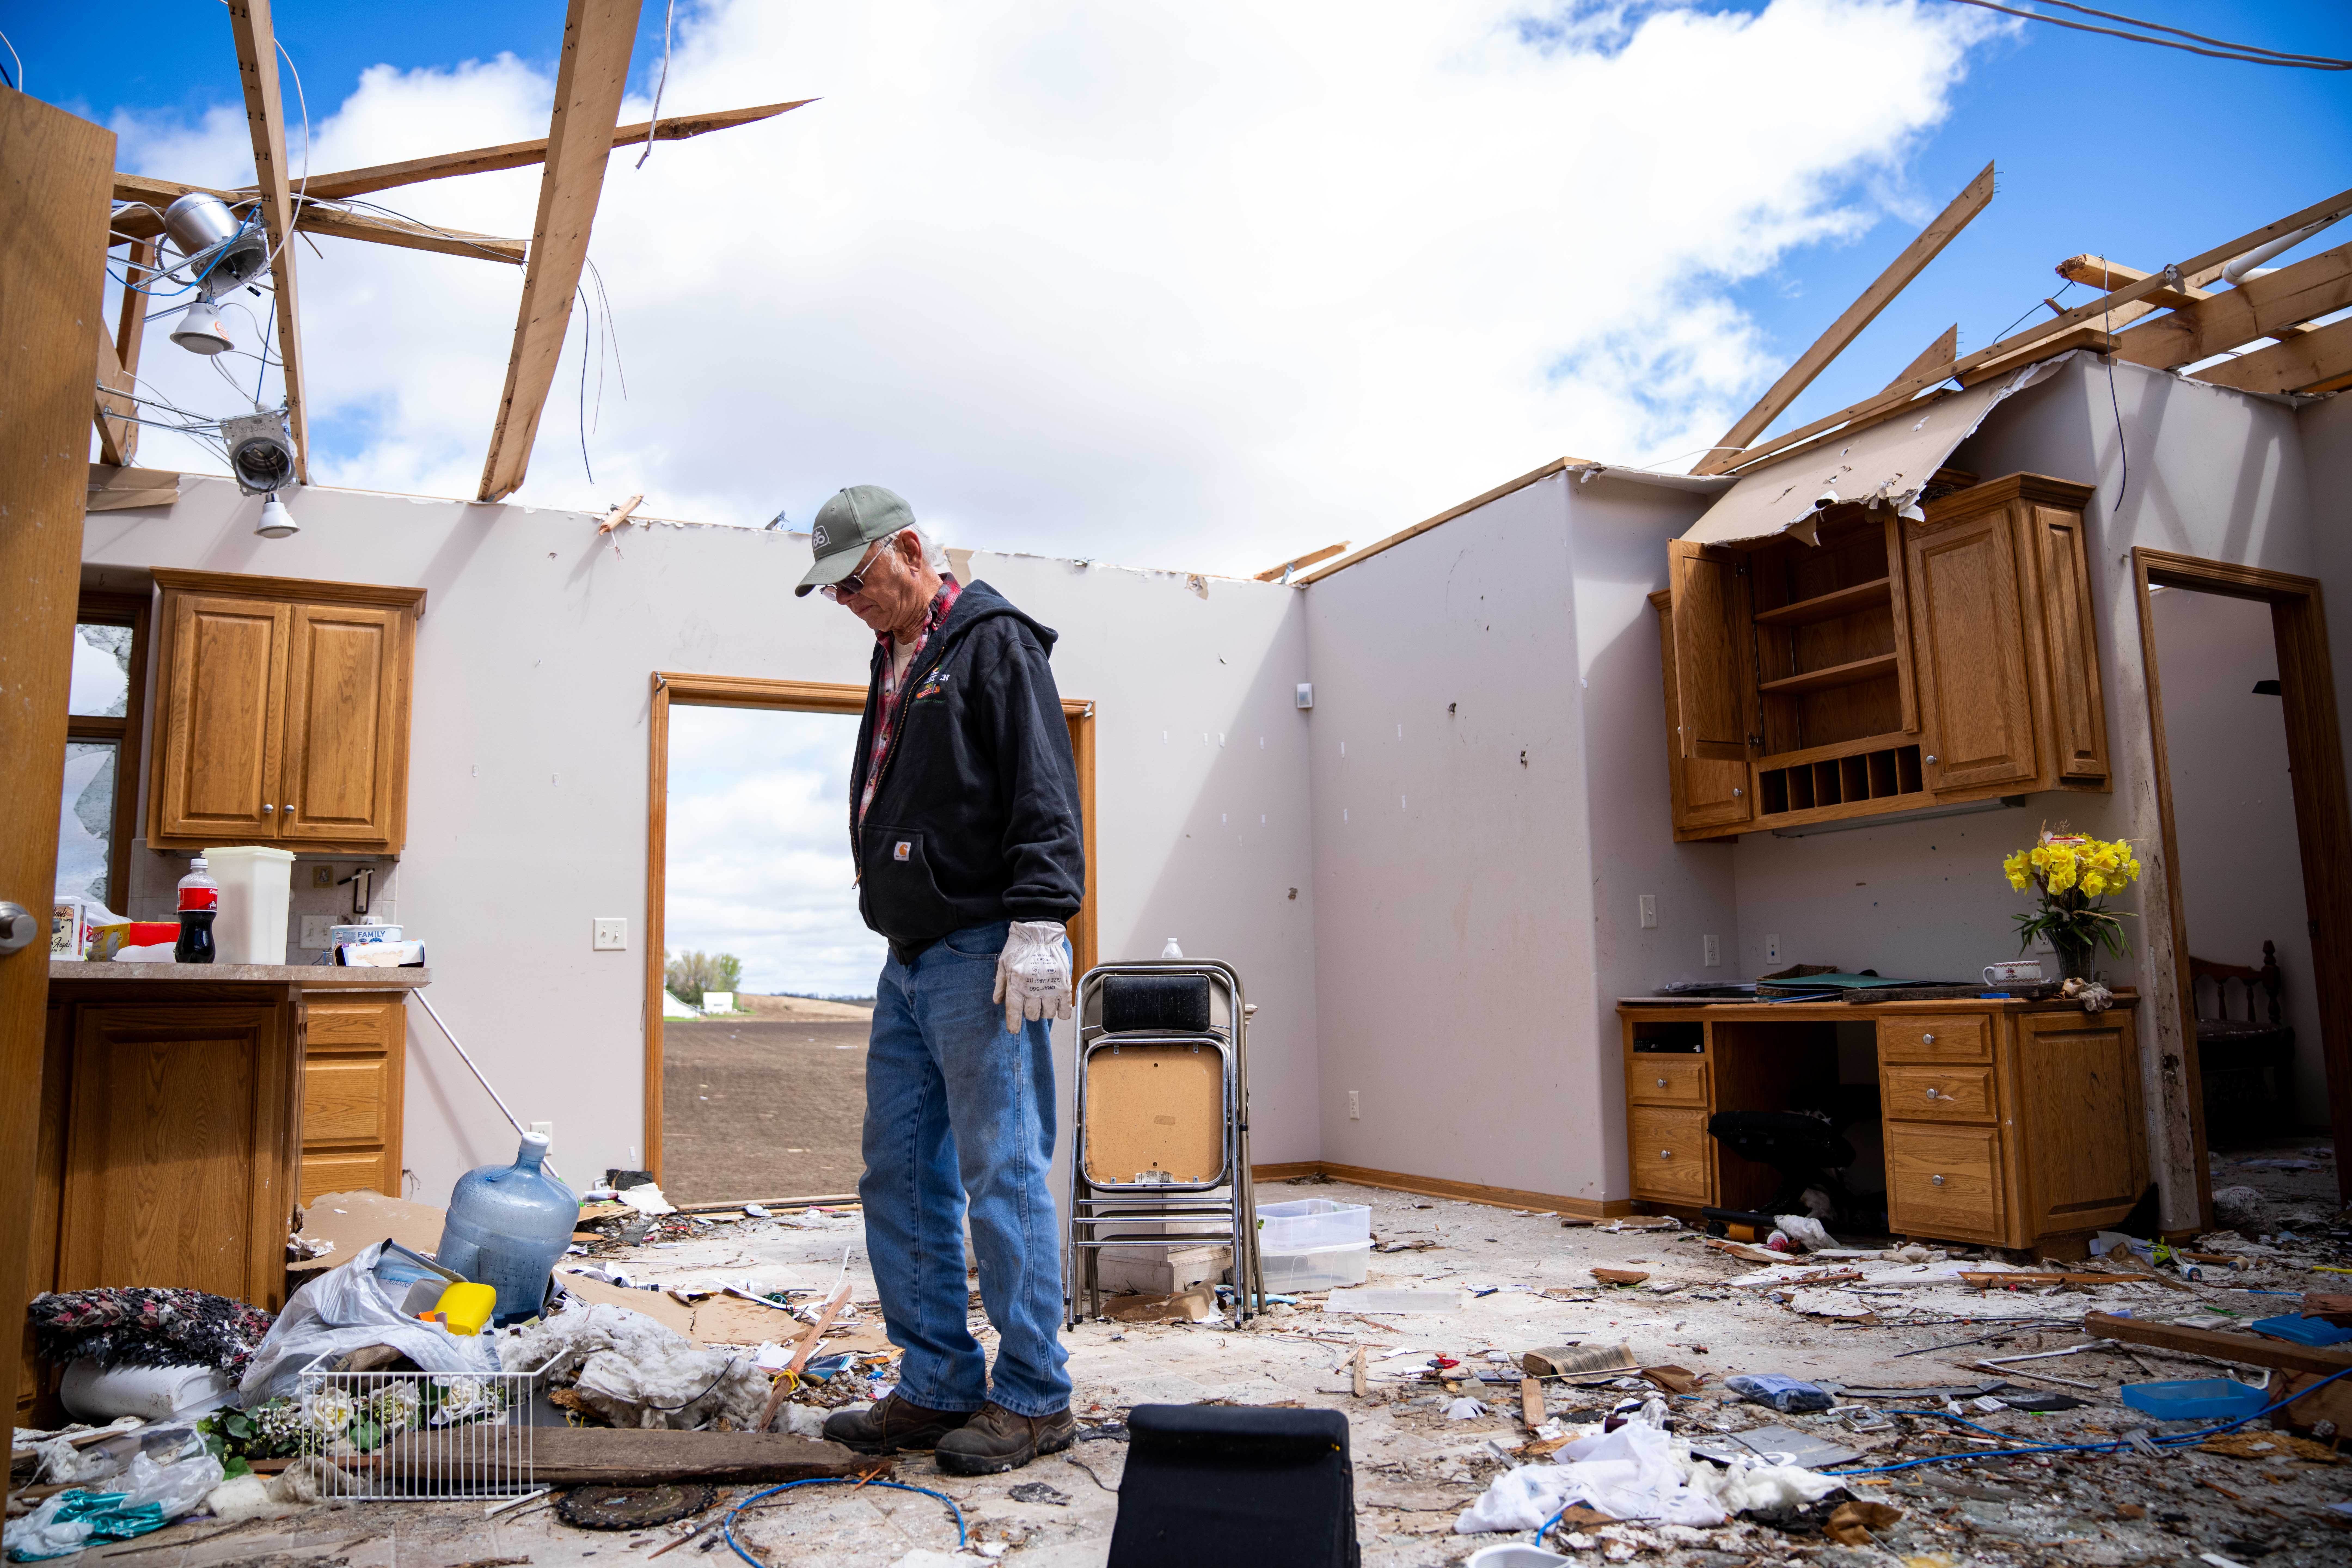 Iowa town has been hit twice by major tornadoes. Is it a magnet for the storms?